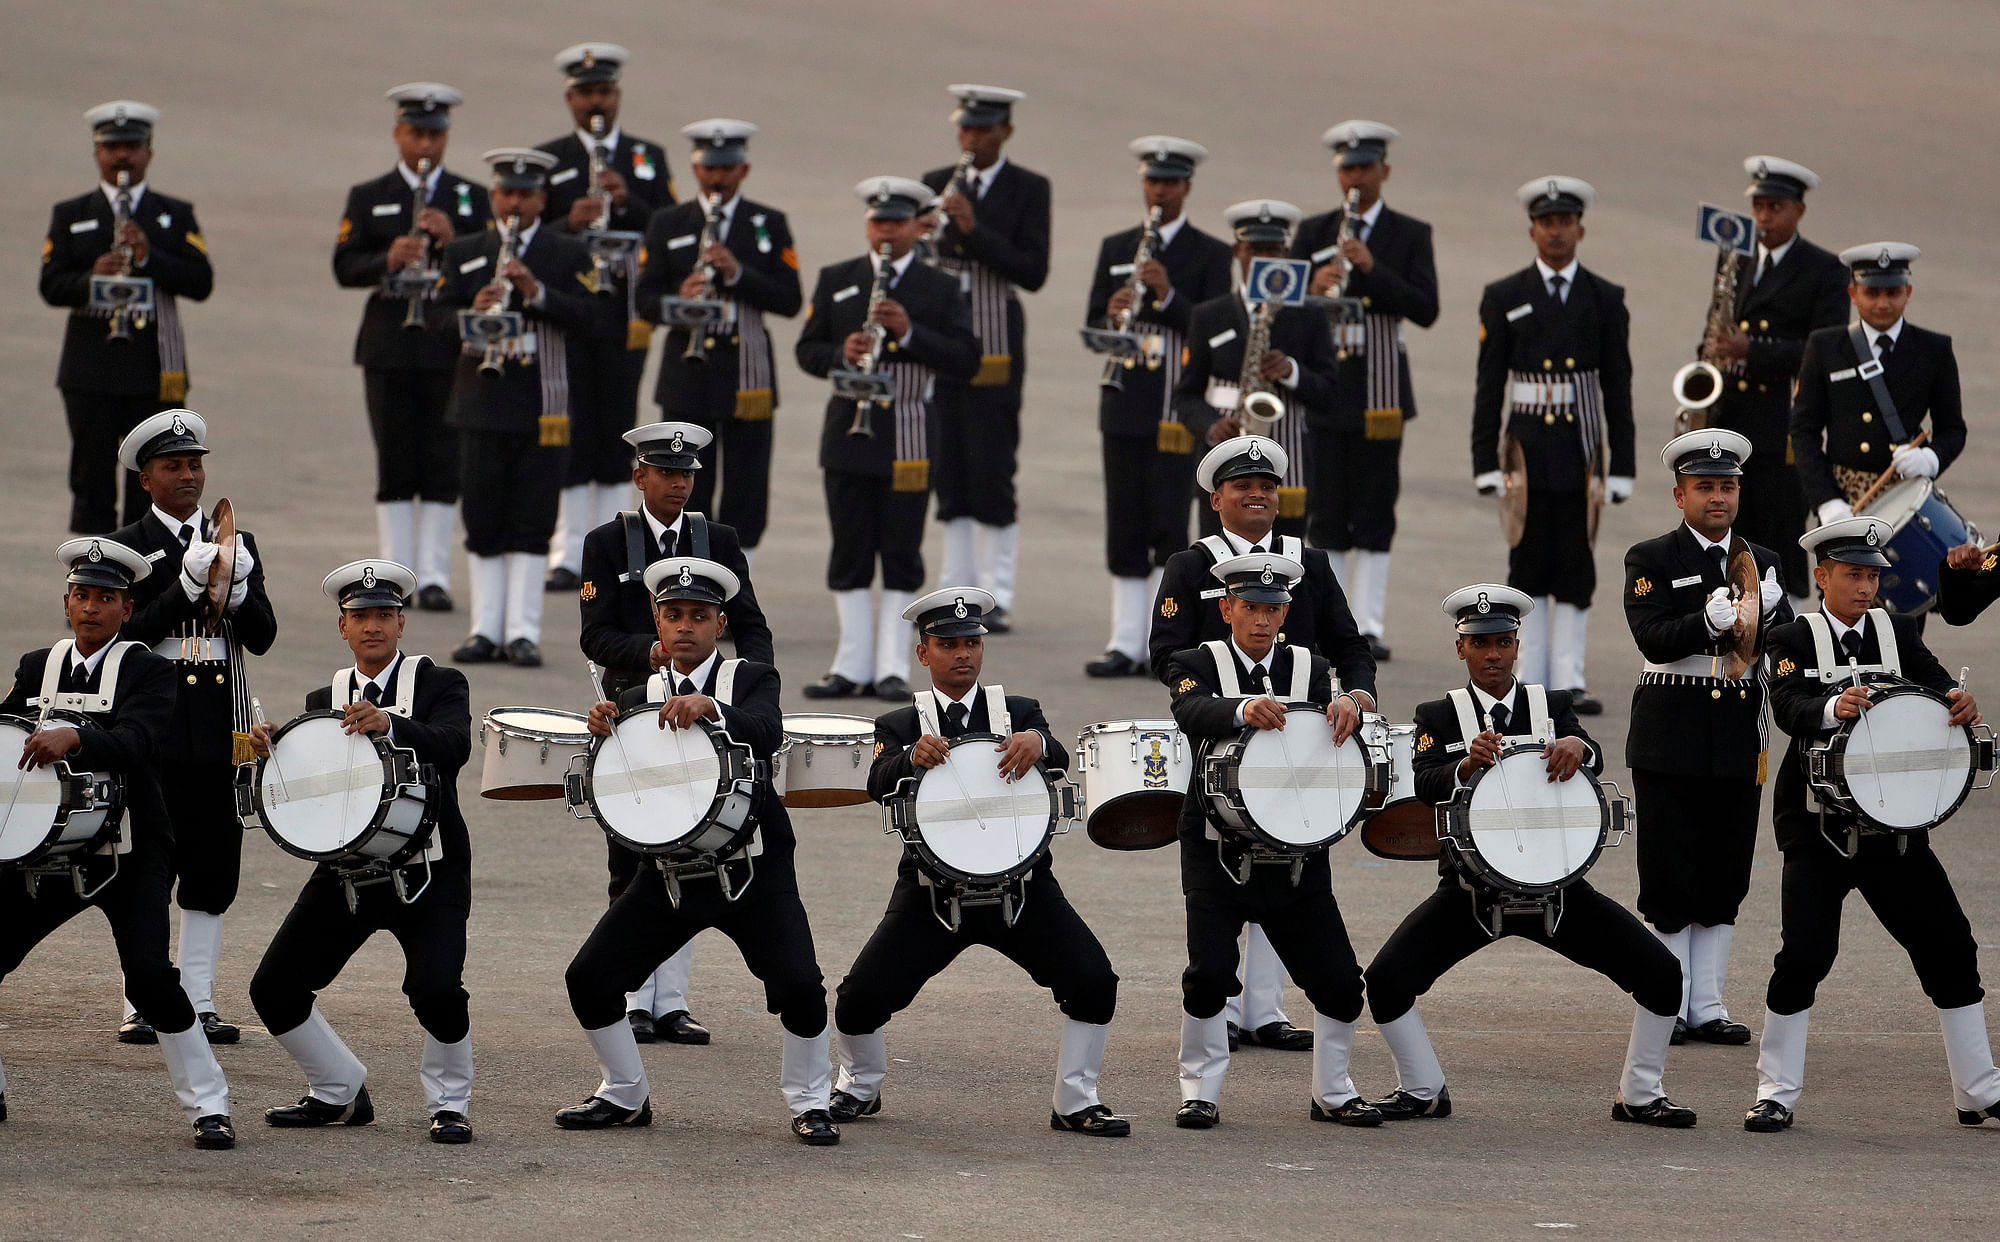 Members of the Indian military band take part in the Beating Retreat ceremony in New Delhi on 29 January 2017. (Photo Courtesy: Reuters/Cathal McNaughton)